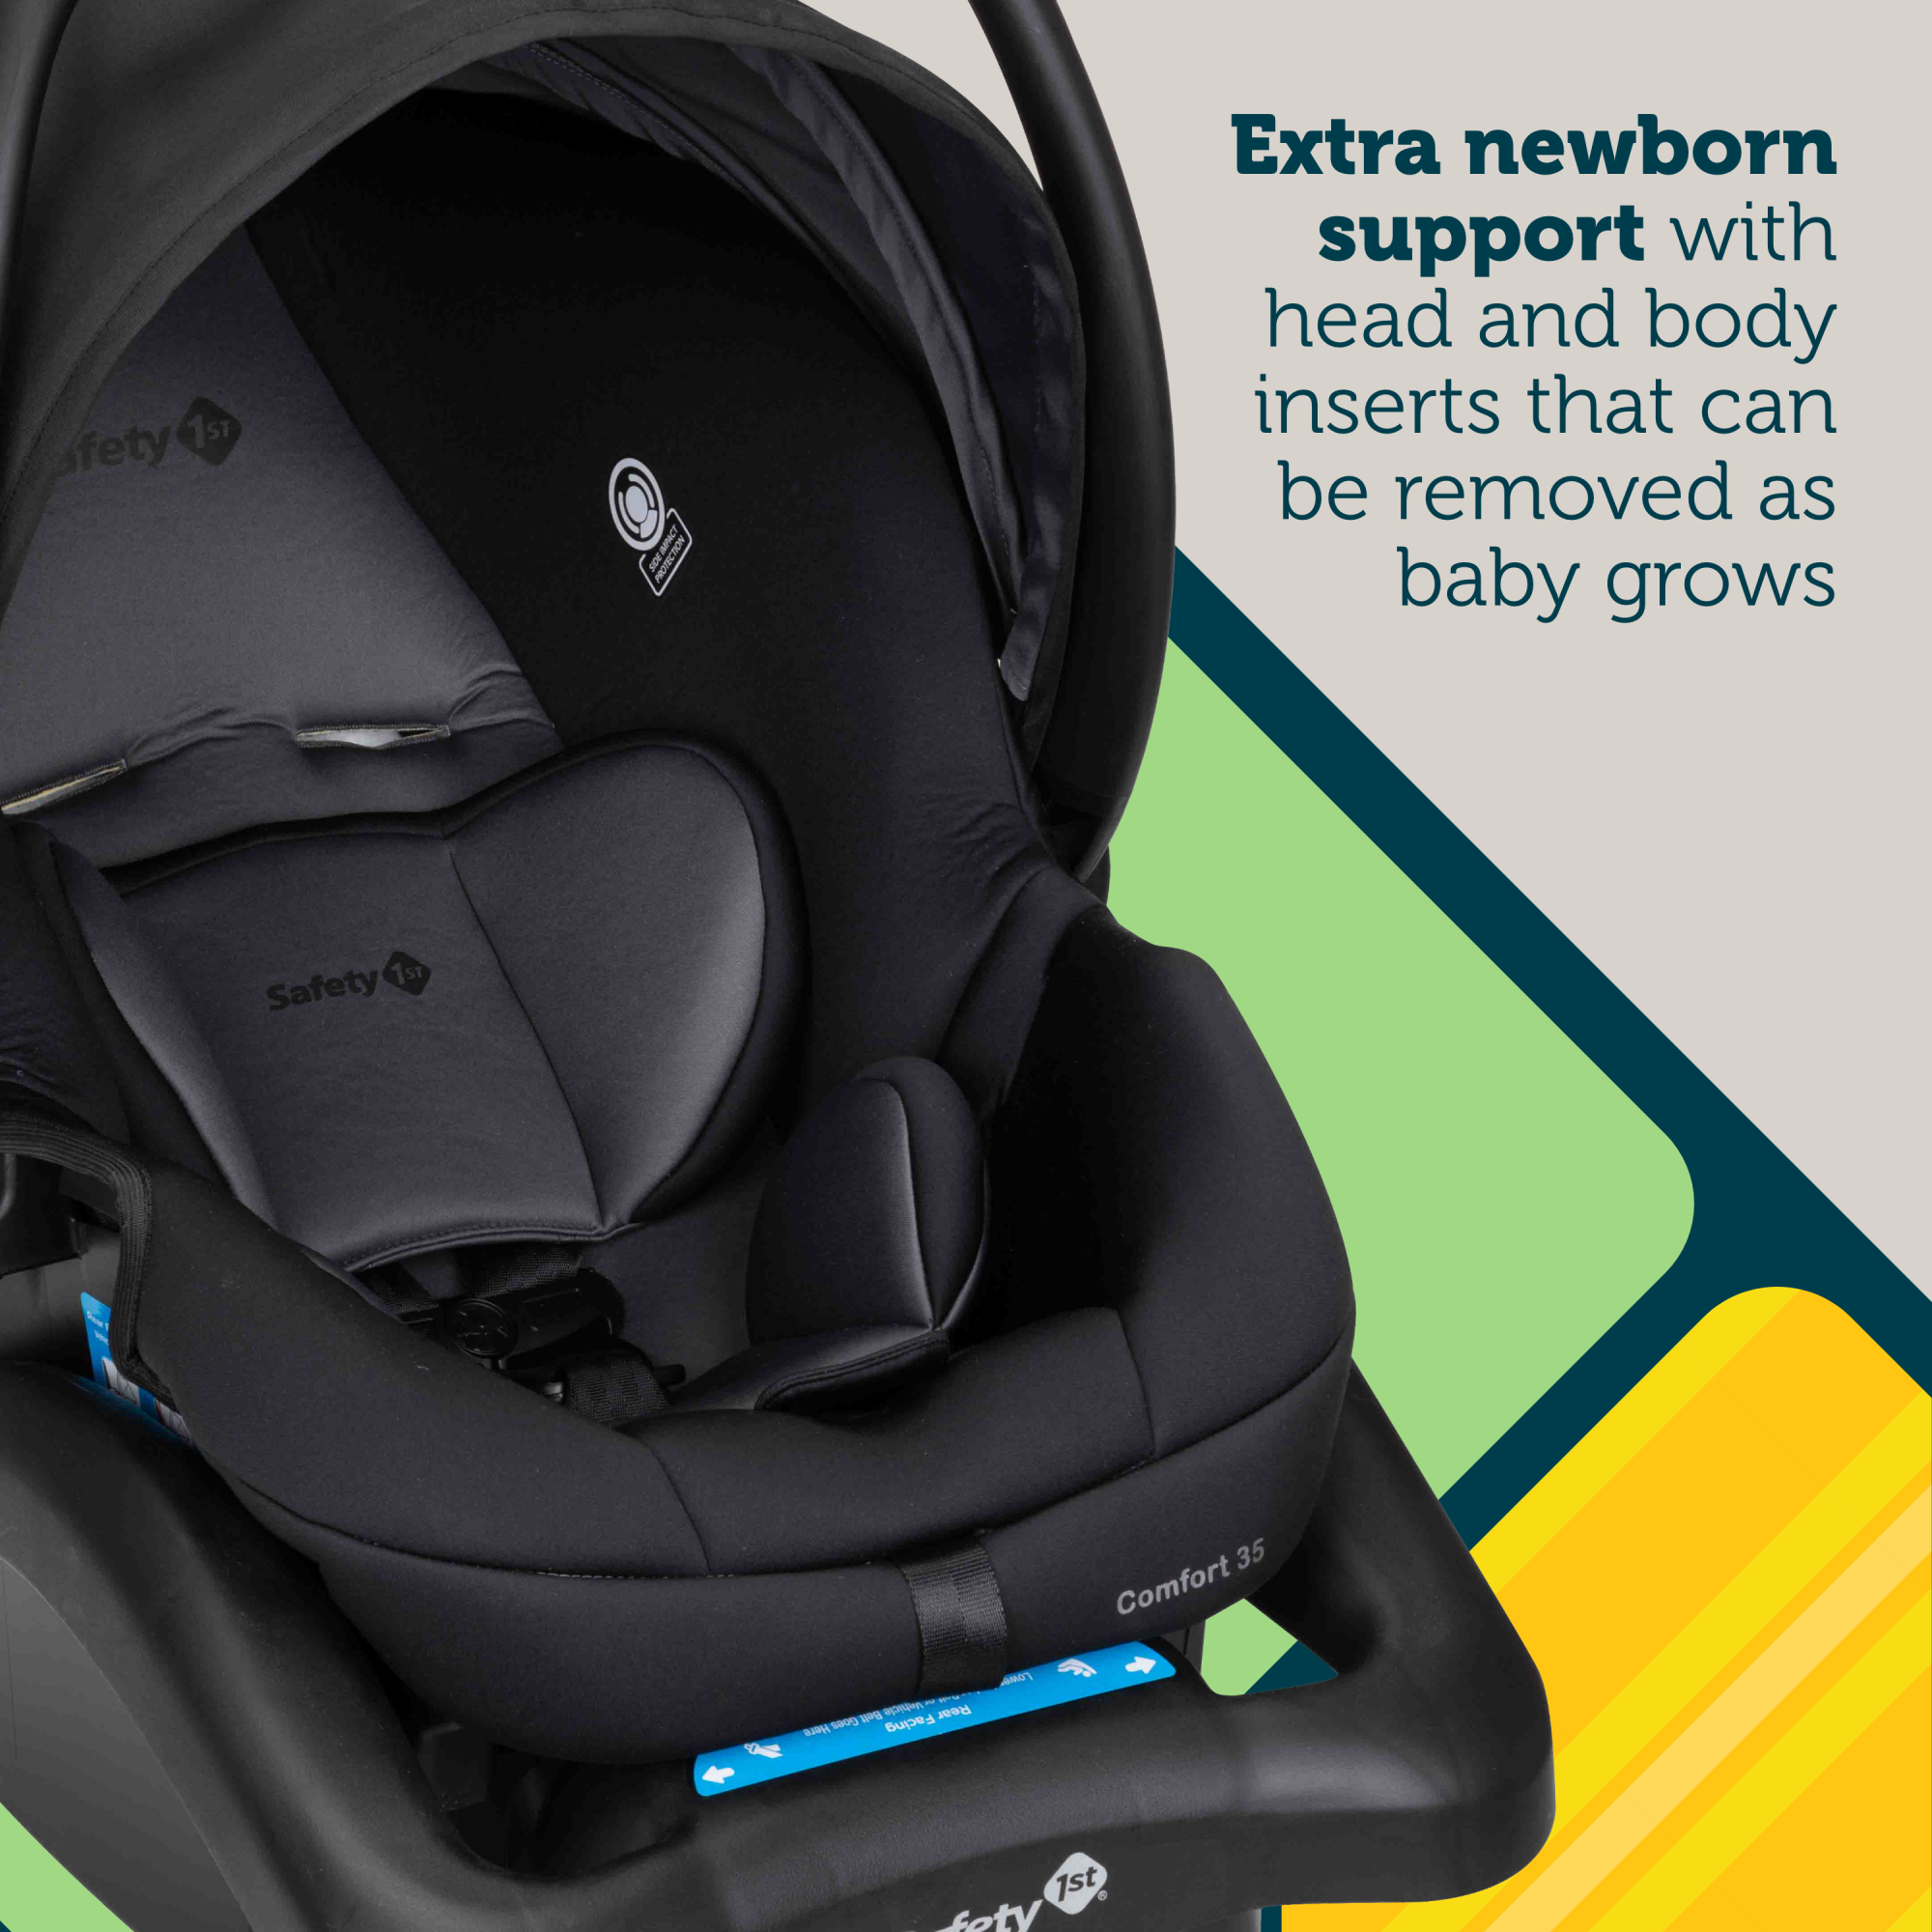 Comfort 35 Infant Car Seat - extra newborn support with head and body inserts that can be removed as baby grows